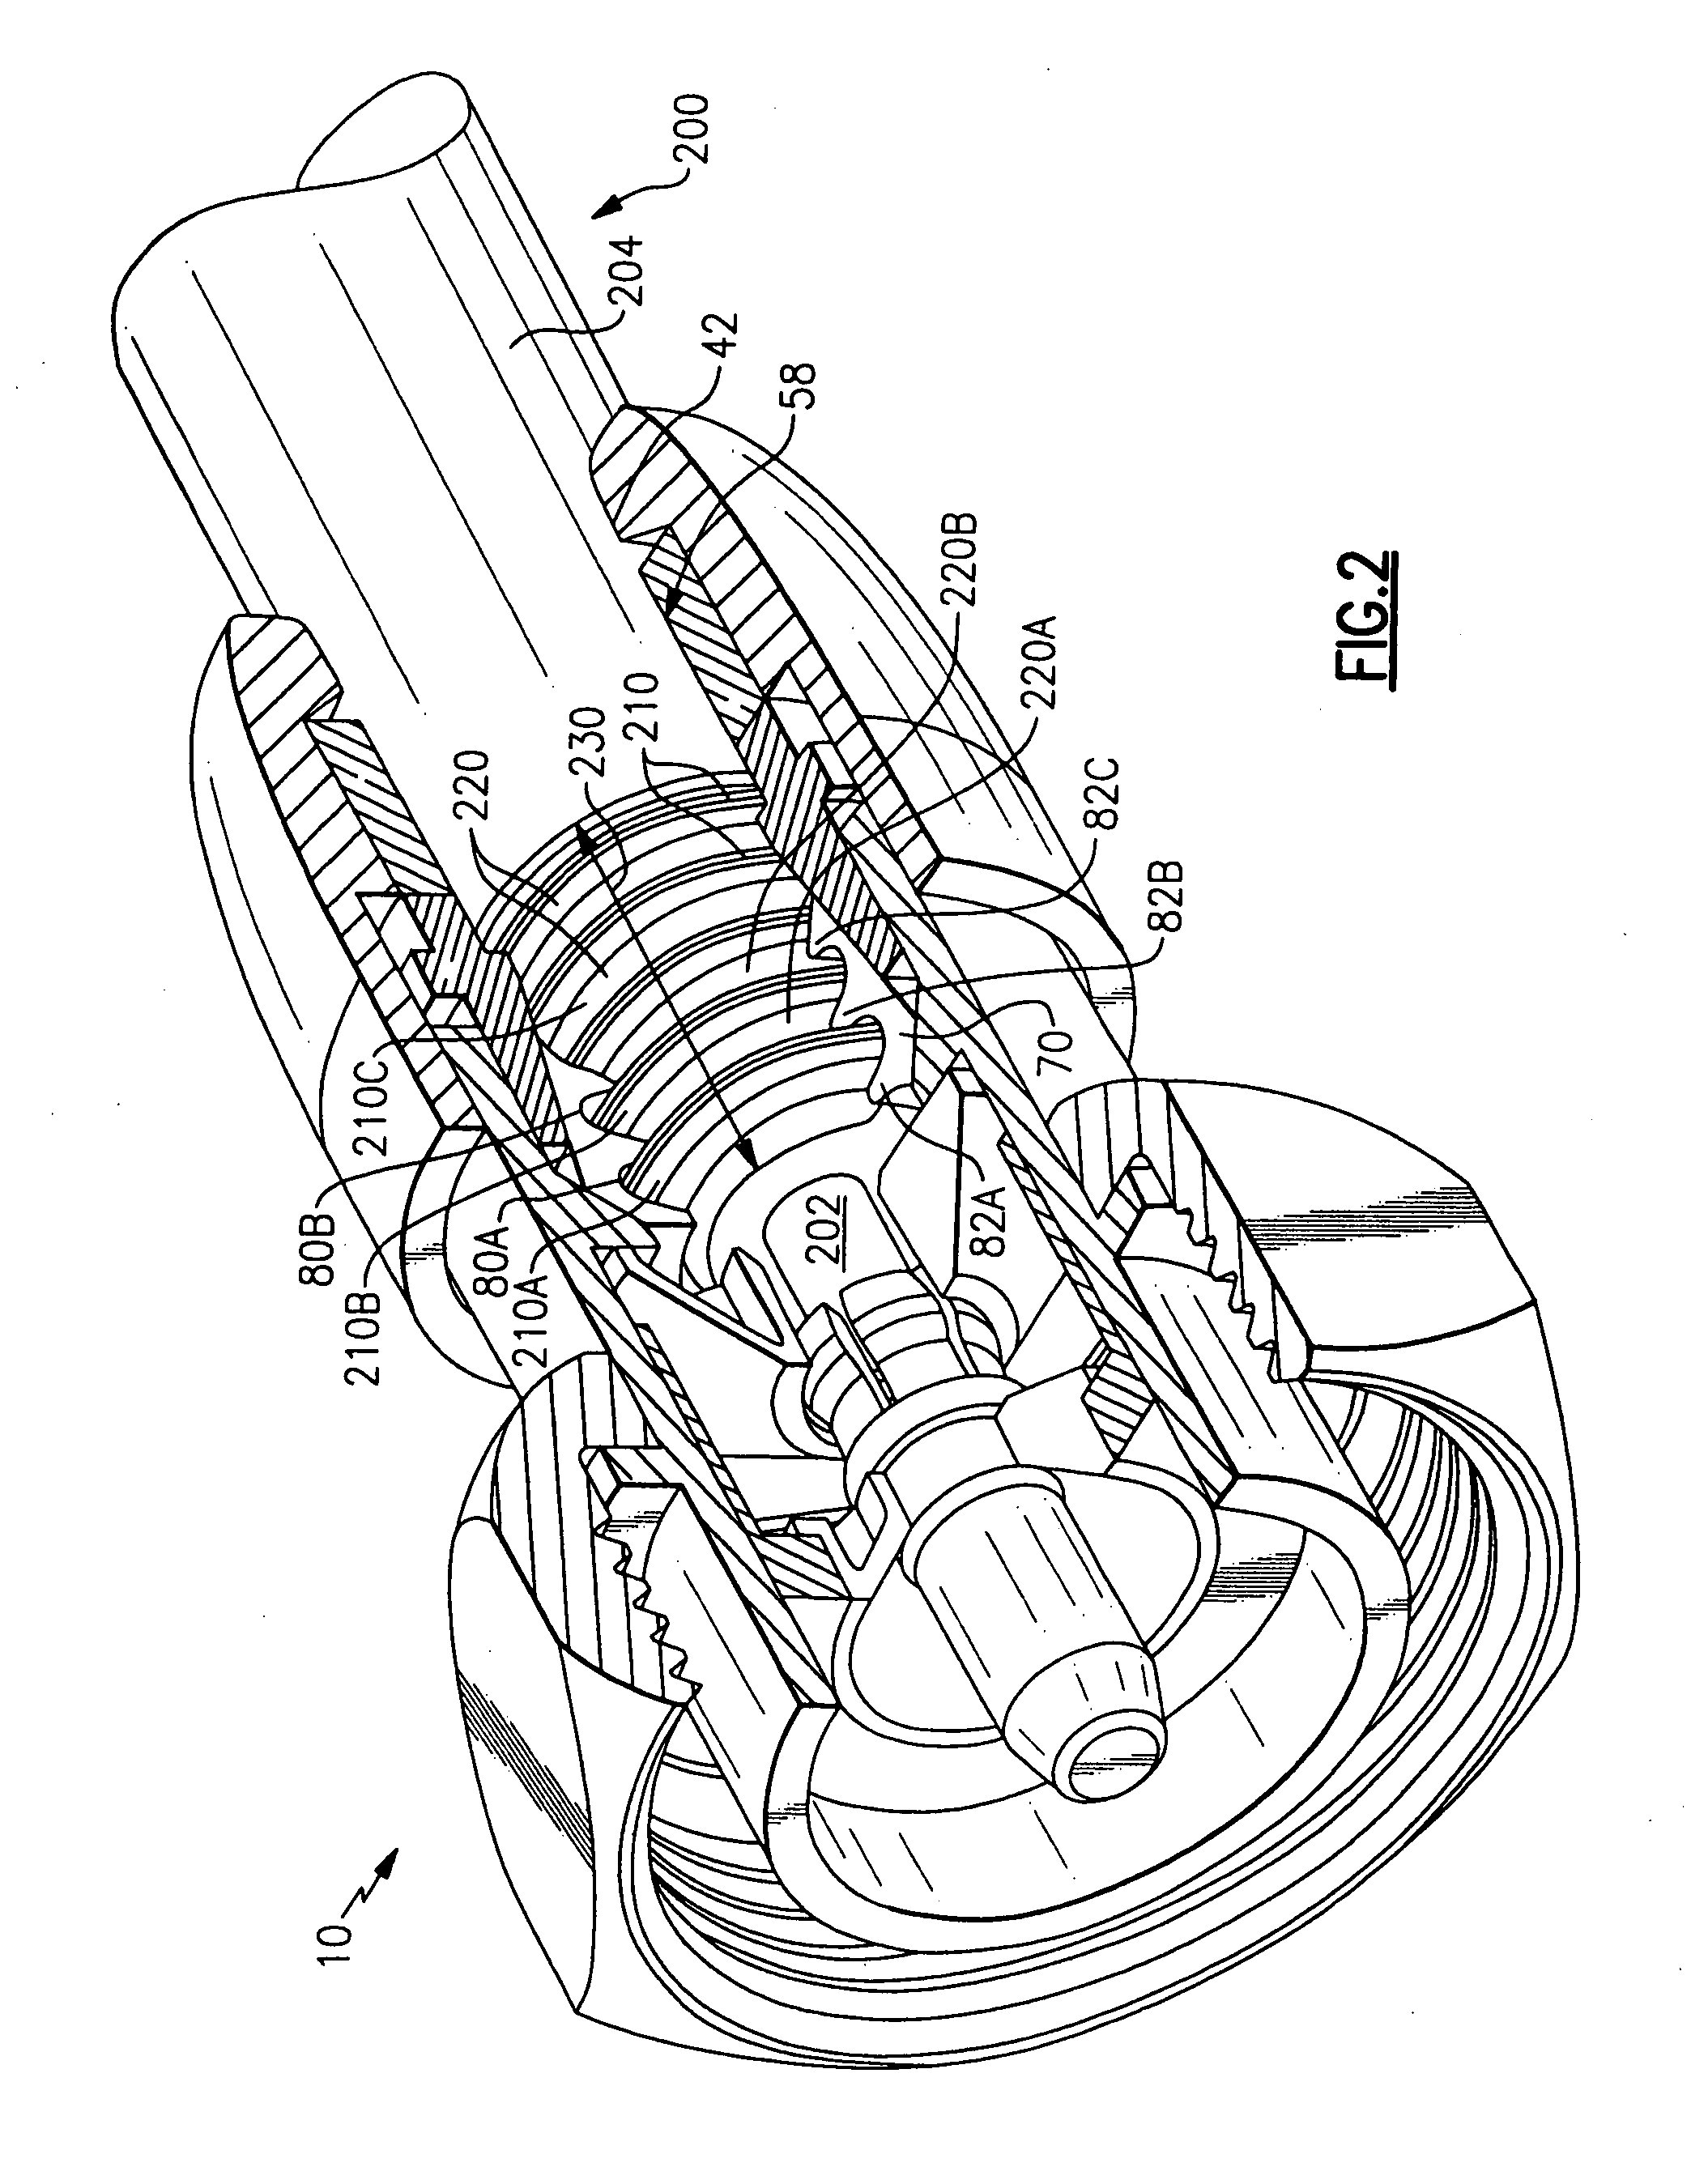 Coaxial cable connector with independently actuated engagement of inner and outer conductors